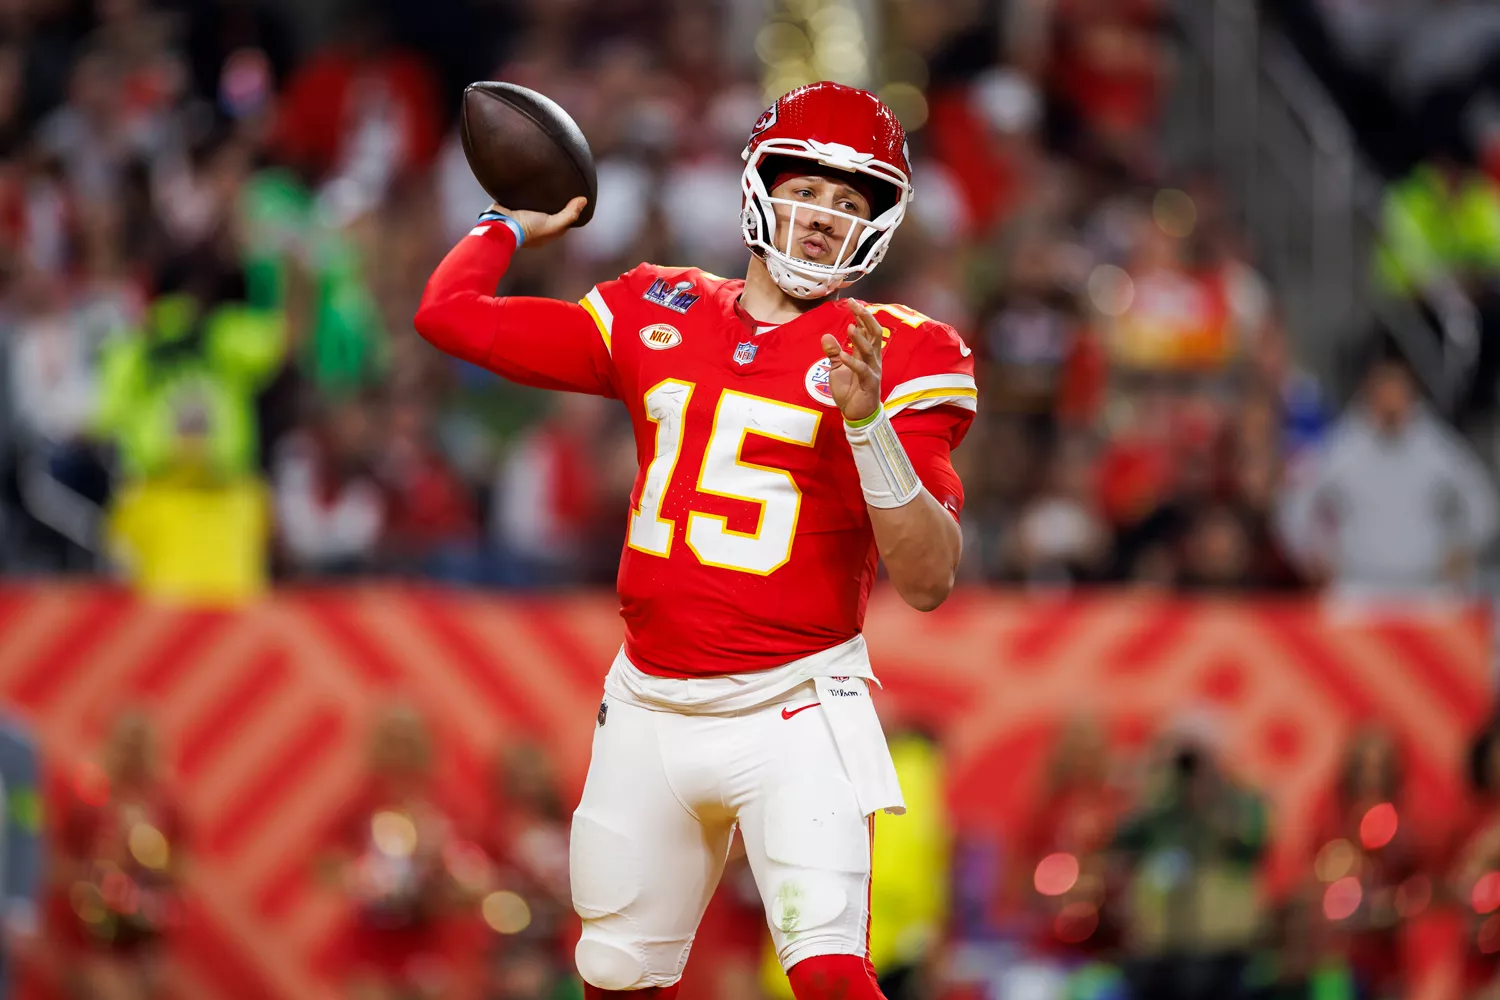 Patrick Mahomes #15 of the Kansas City Chiefs drops back and looks to throw a pass during Super Bowl LVIII against the San Francisco 49ers at Allegiant Stadium on February 11, 2024 in Las Vegas, Nevada